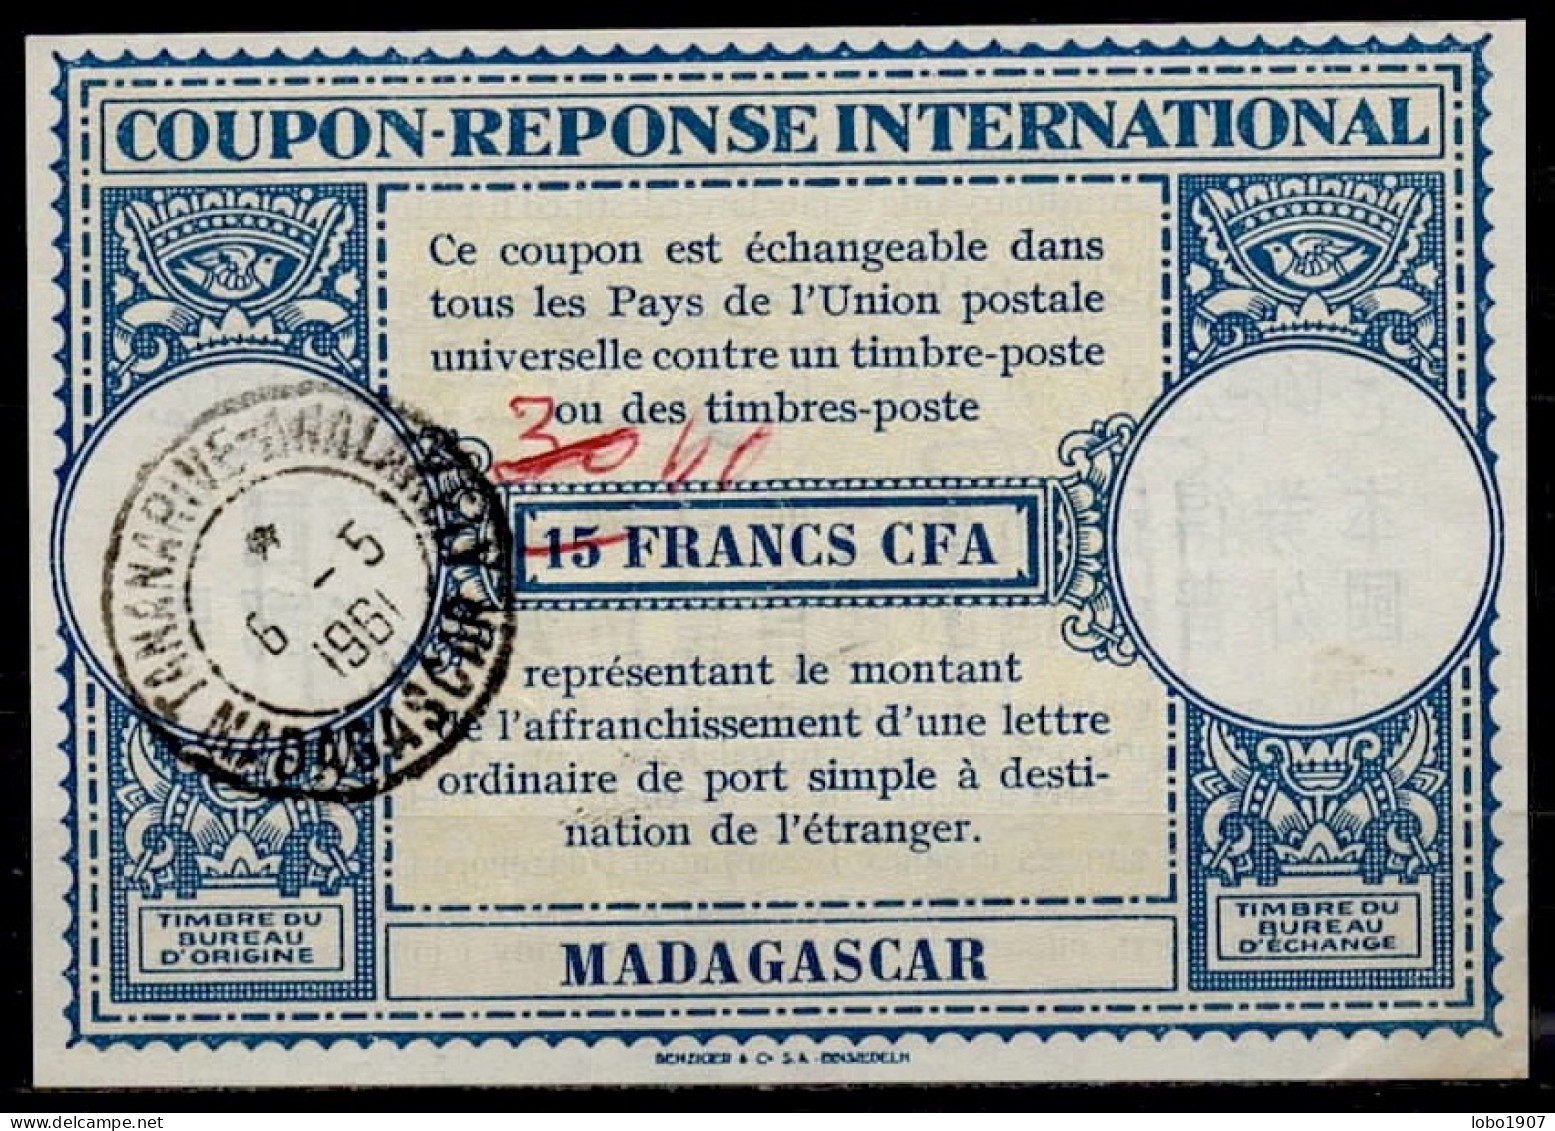 MADAGASCAR  Lo15  40 / 30 / 15 FRANCS CFA Int. Reply Coupon Reponse Antwortschein IRC IAS TANANARIVE ANALAKELY 06.05.61 - Briefe U. Dokumente